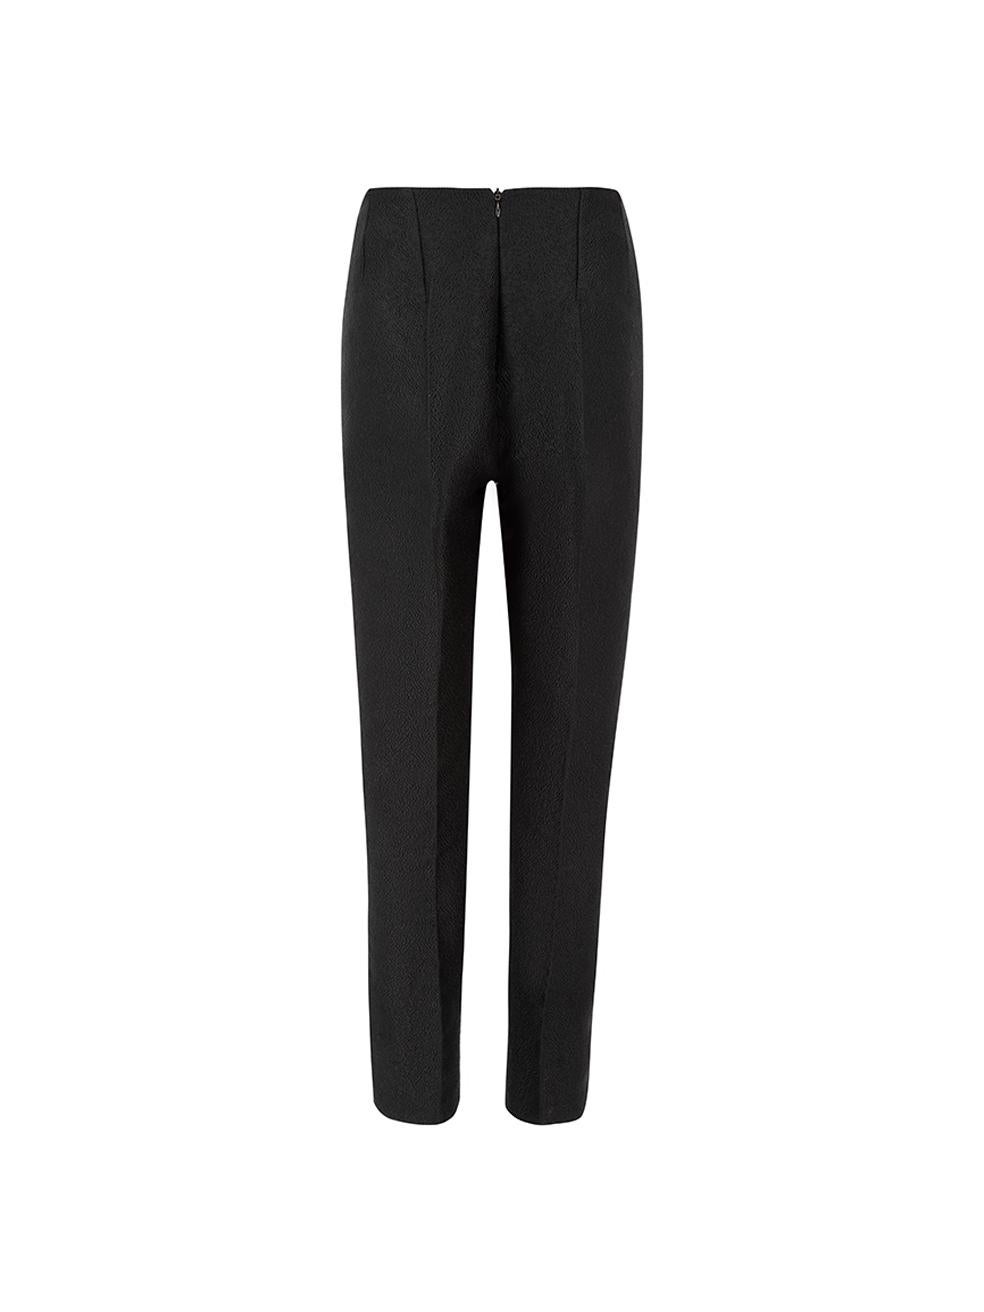 Emilia Wickstead Women's Black Textured Straight Leg Trousers In Excellent Condition For Sale In London, GB